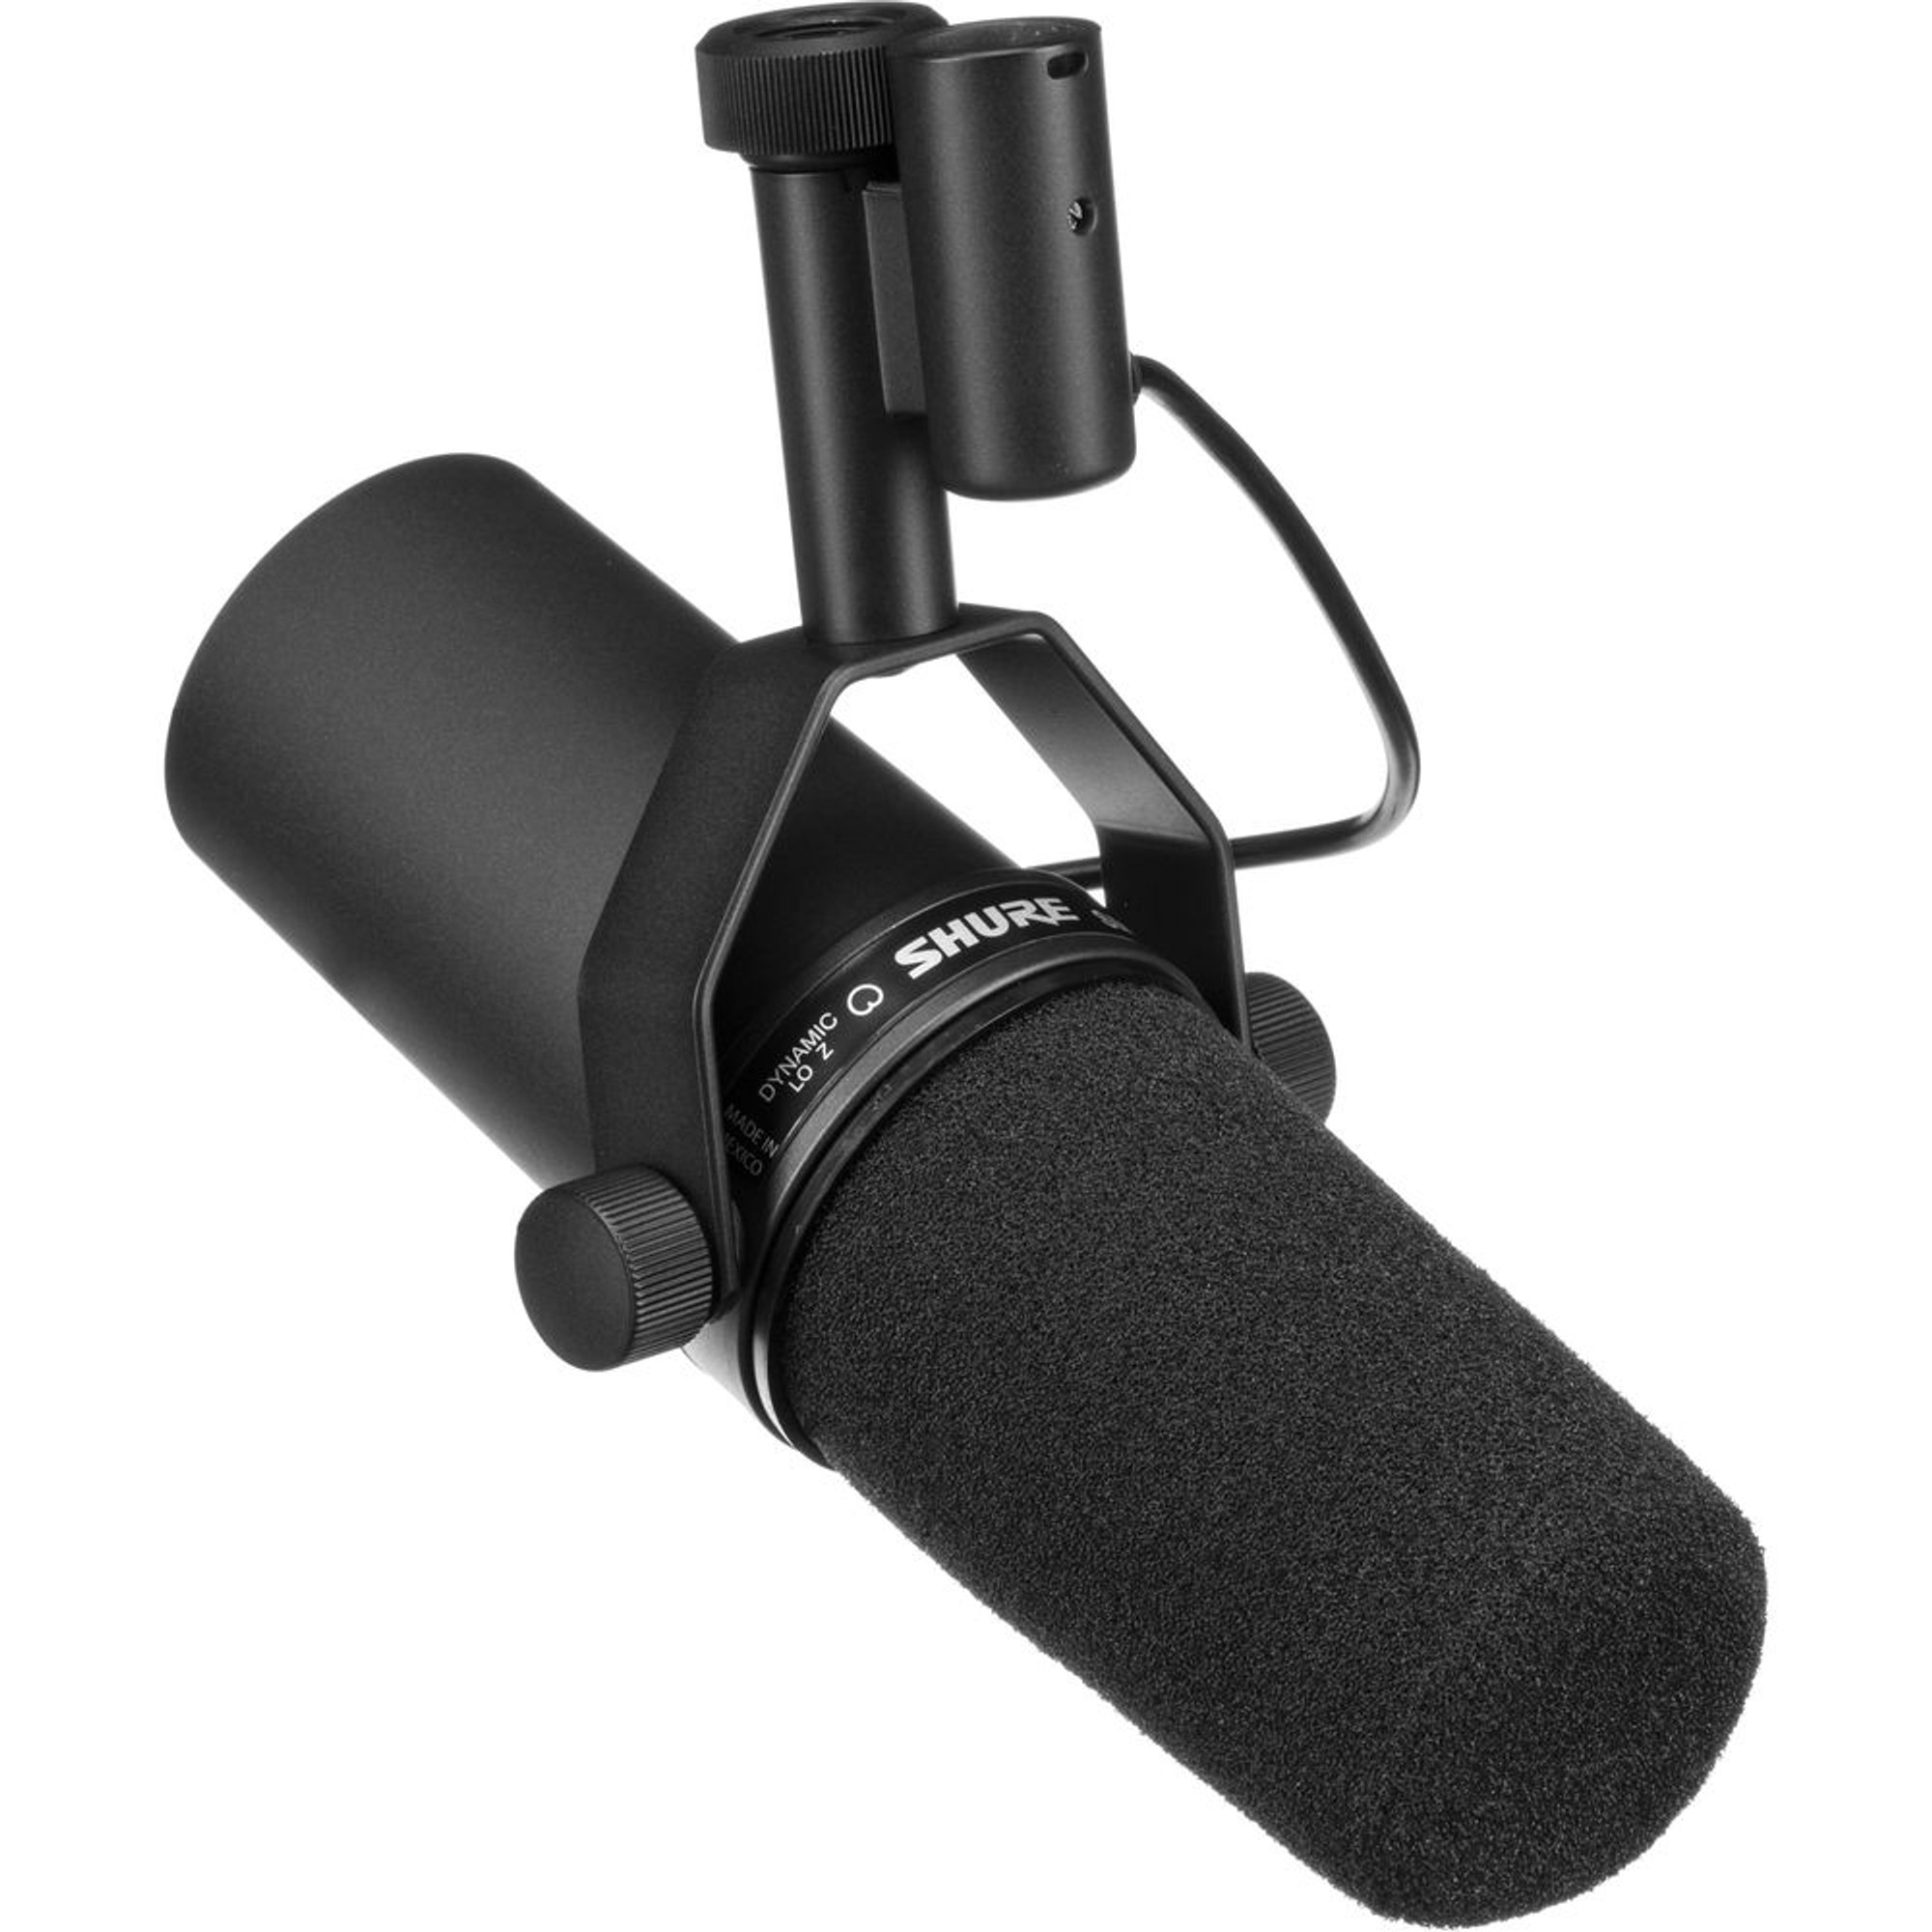 Shure SM7B microphone review: A great studio upgrade